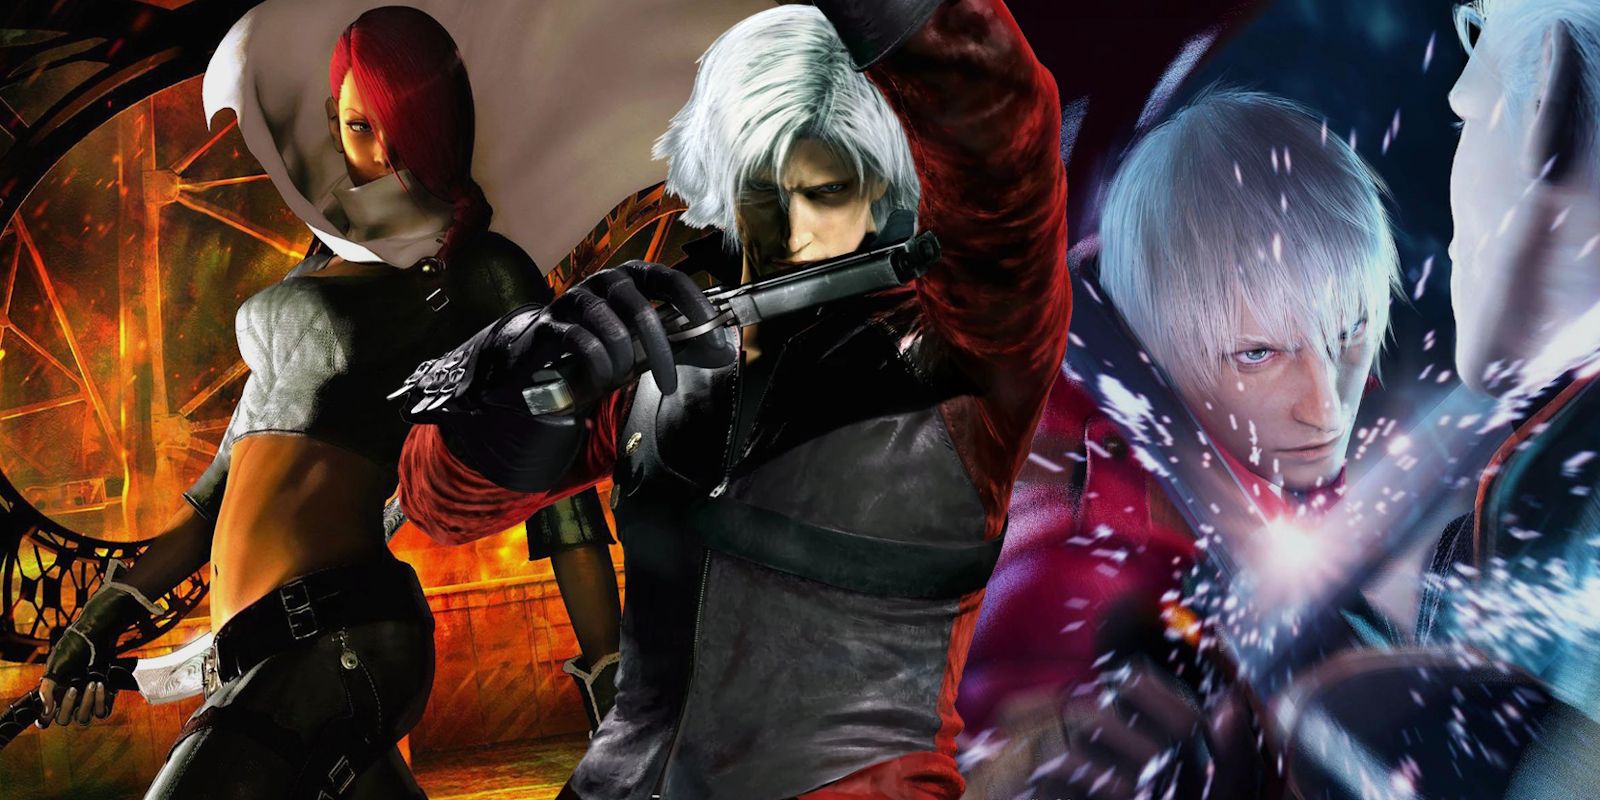 Images of Dante and Lucia from Devil May Cry 2, and Dante fighting Vergil from Devil May Cry 3